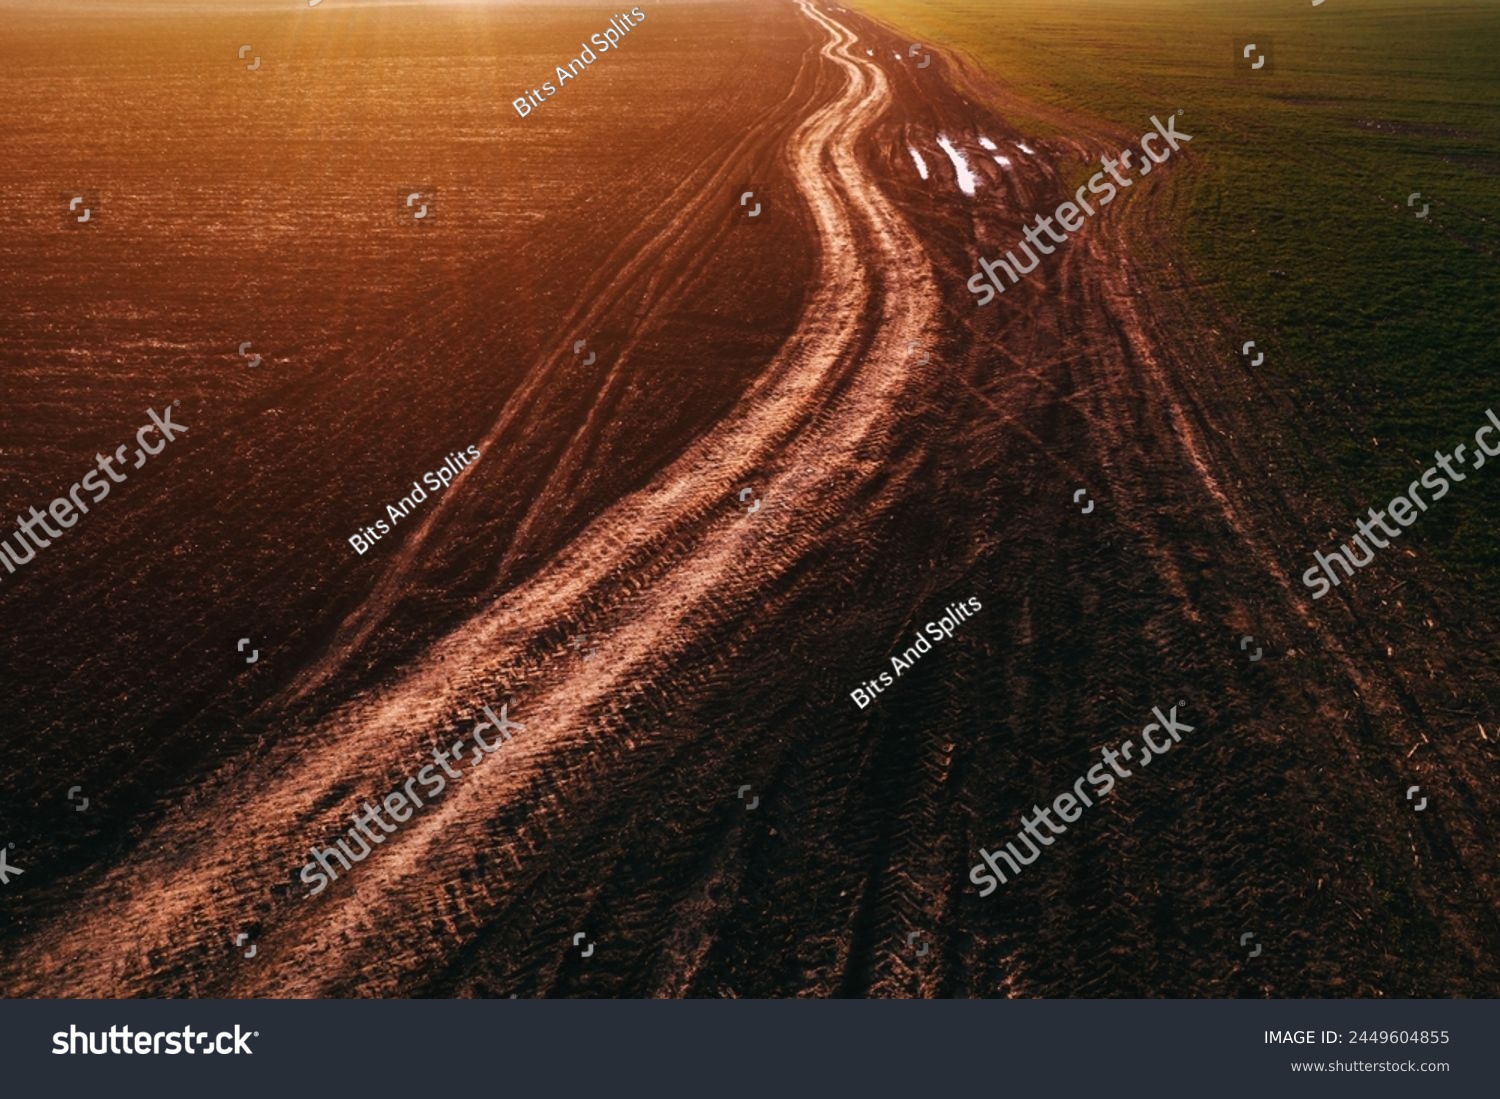 Dirt road with tractor tire track pattern in diminishing perspective, aerial view from drone pov high angle view #2449604855